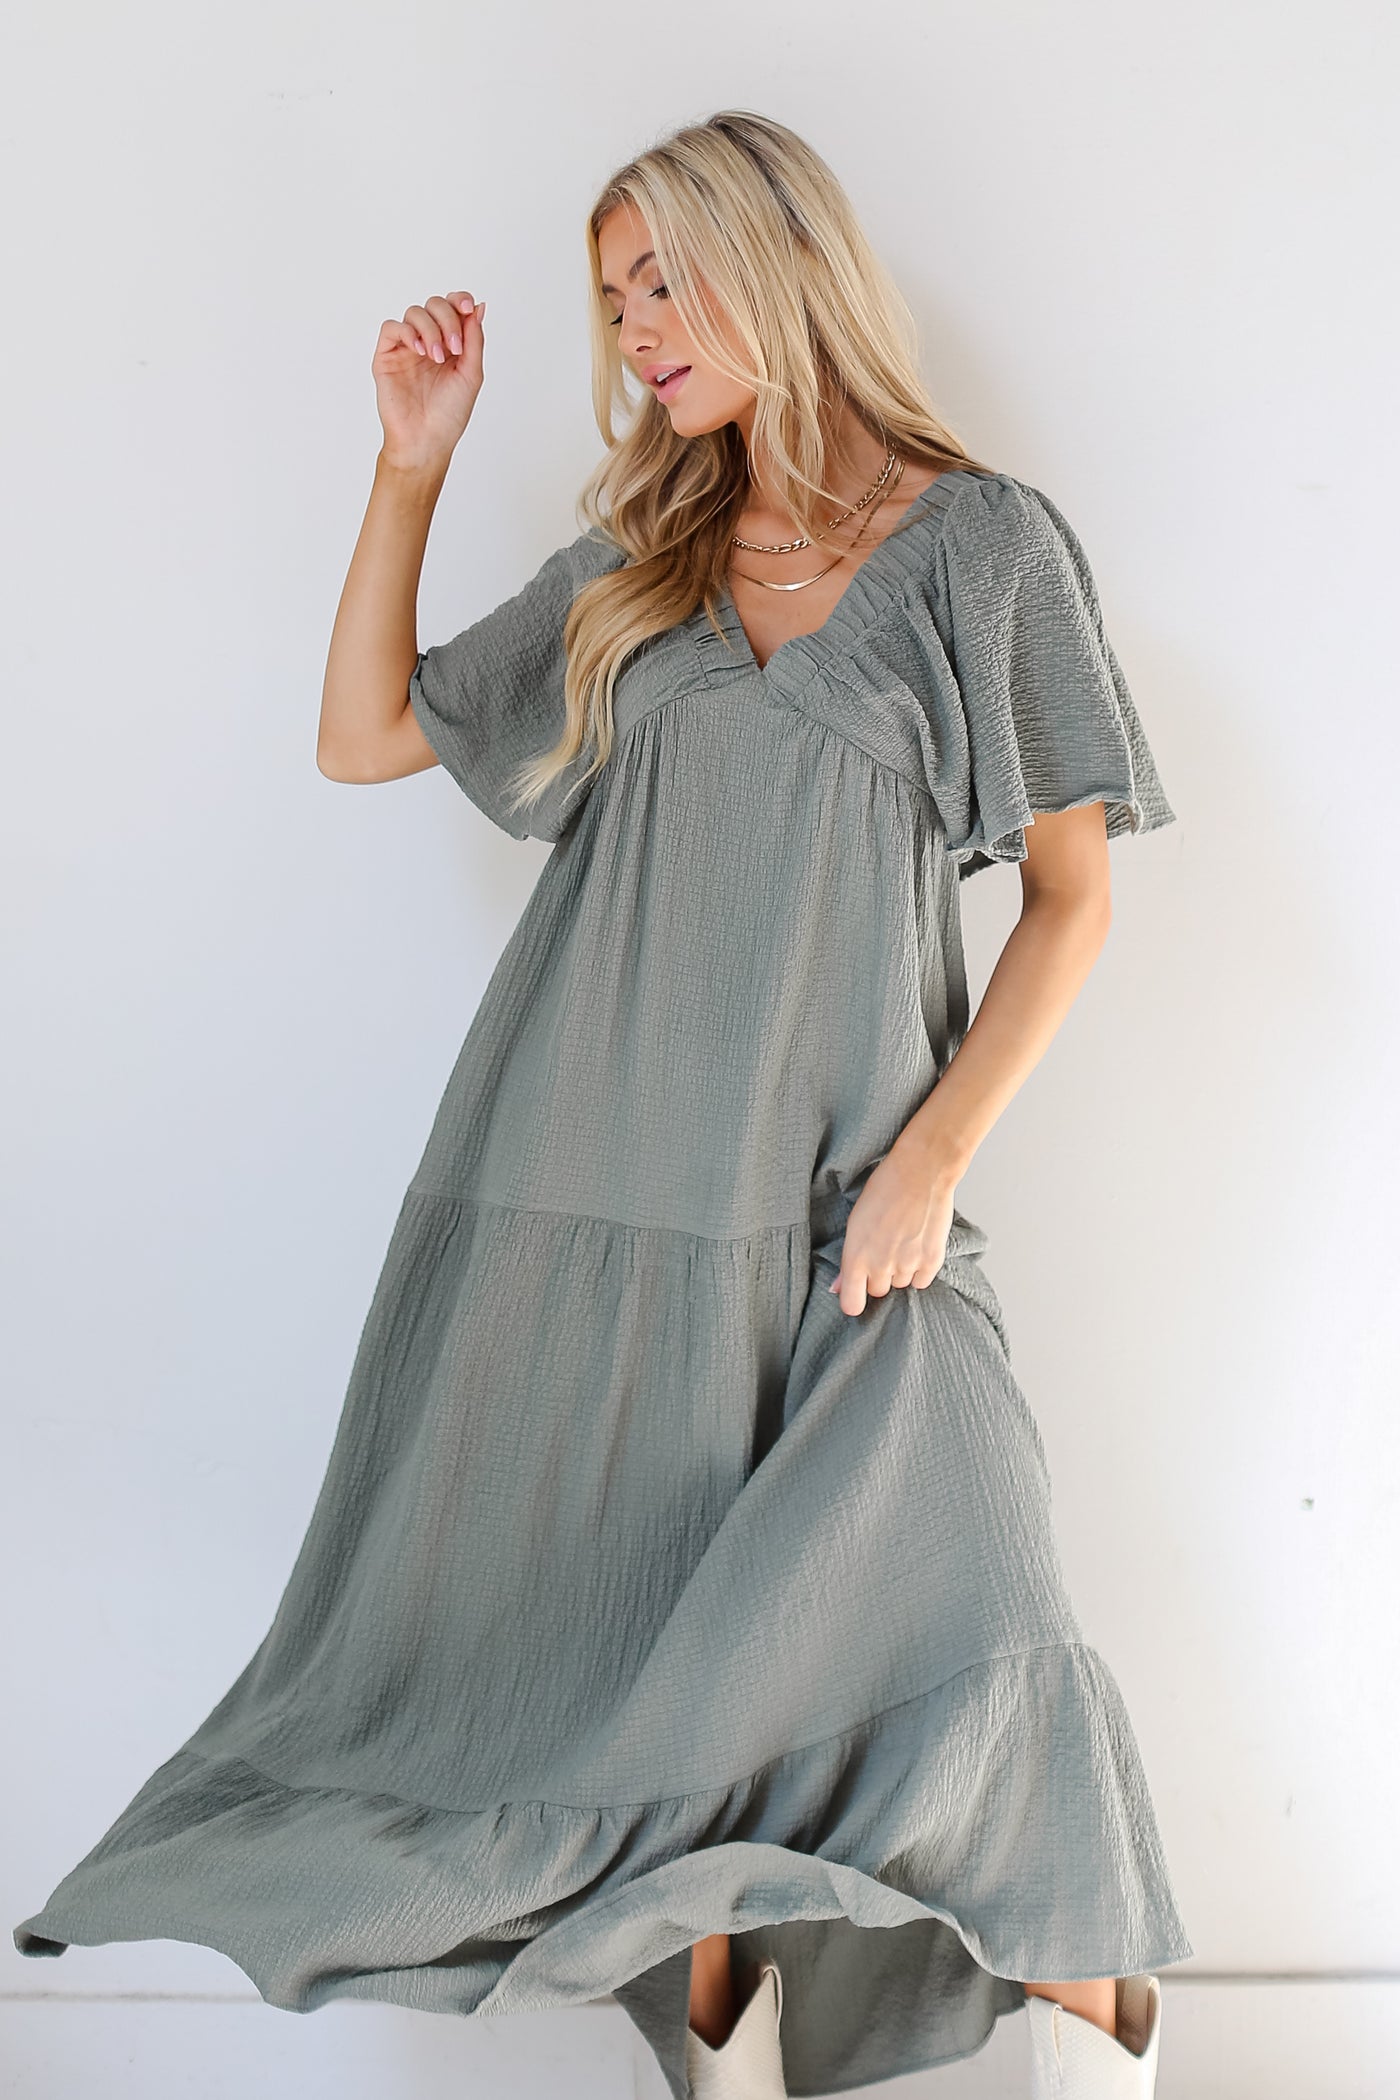 olive Tiered Maxi Dress front view